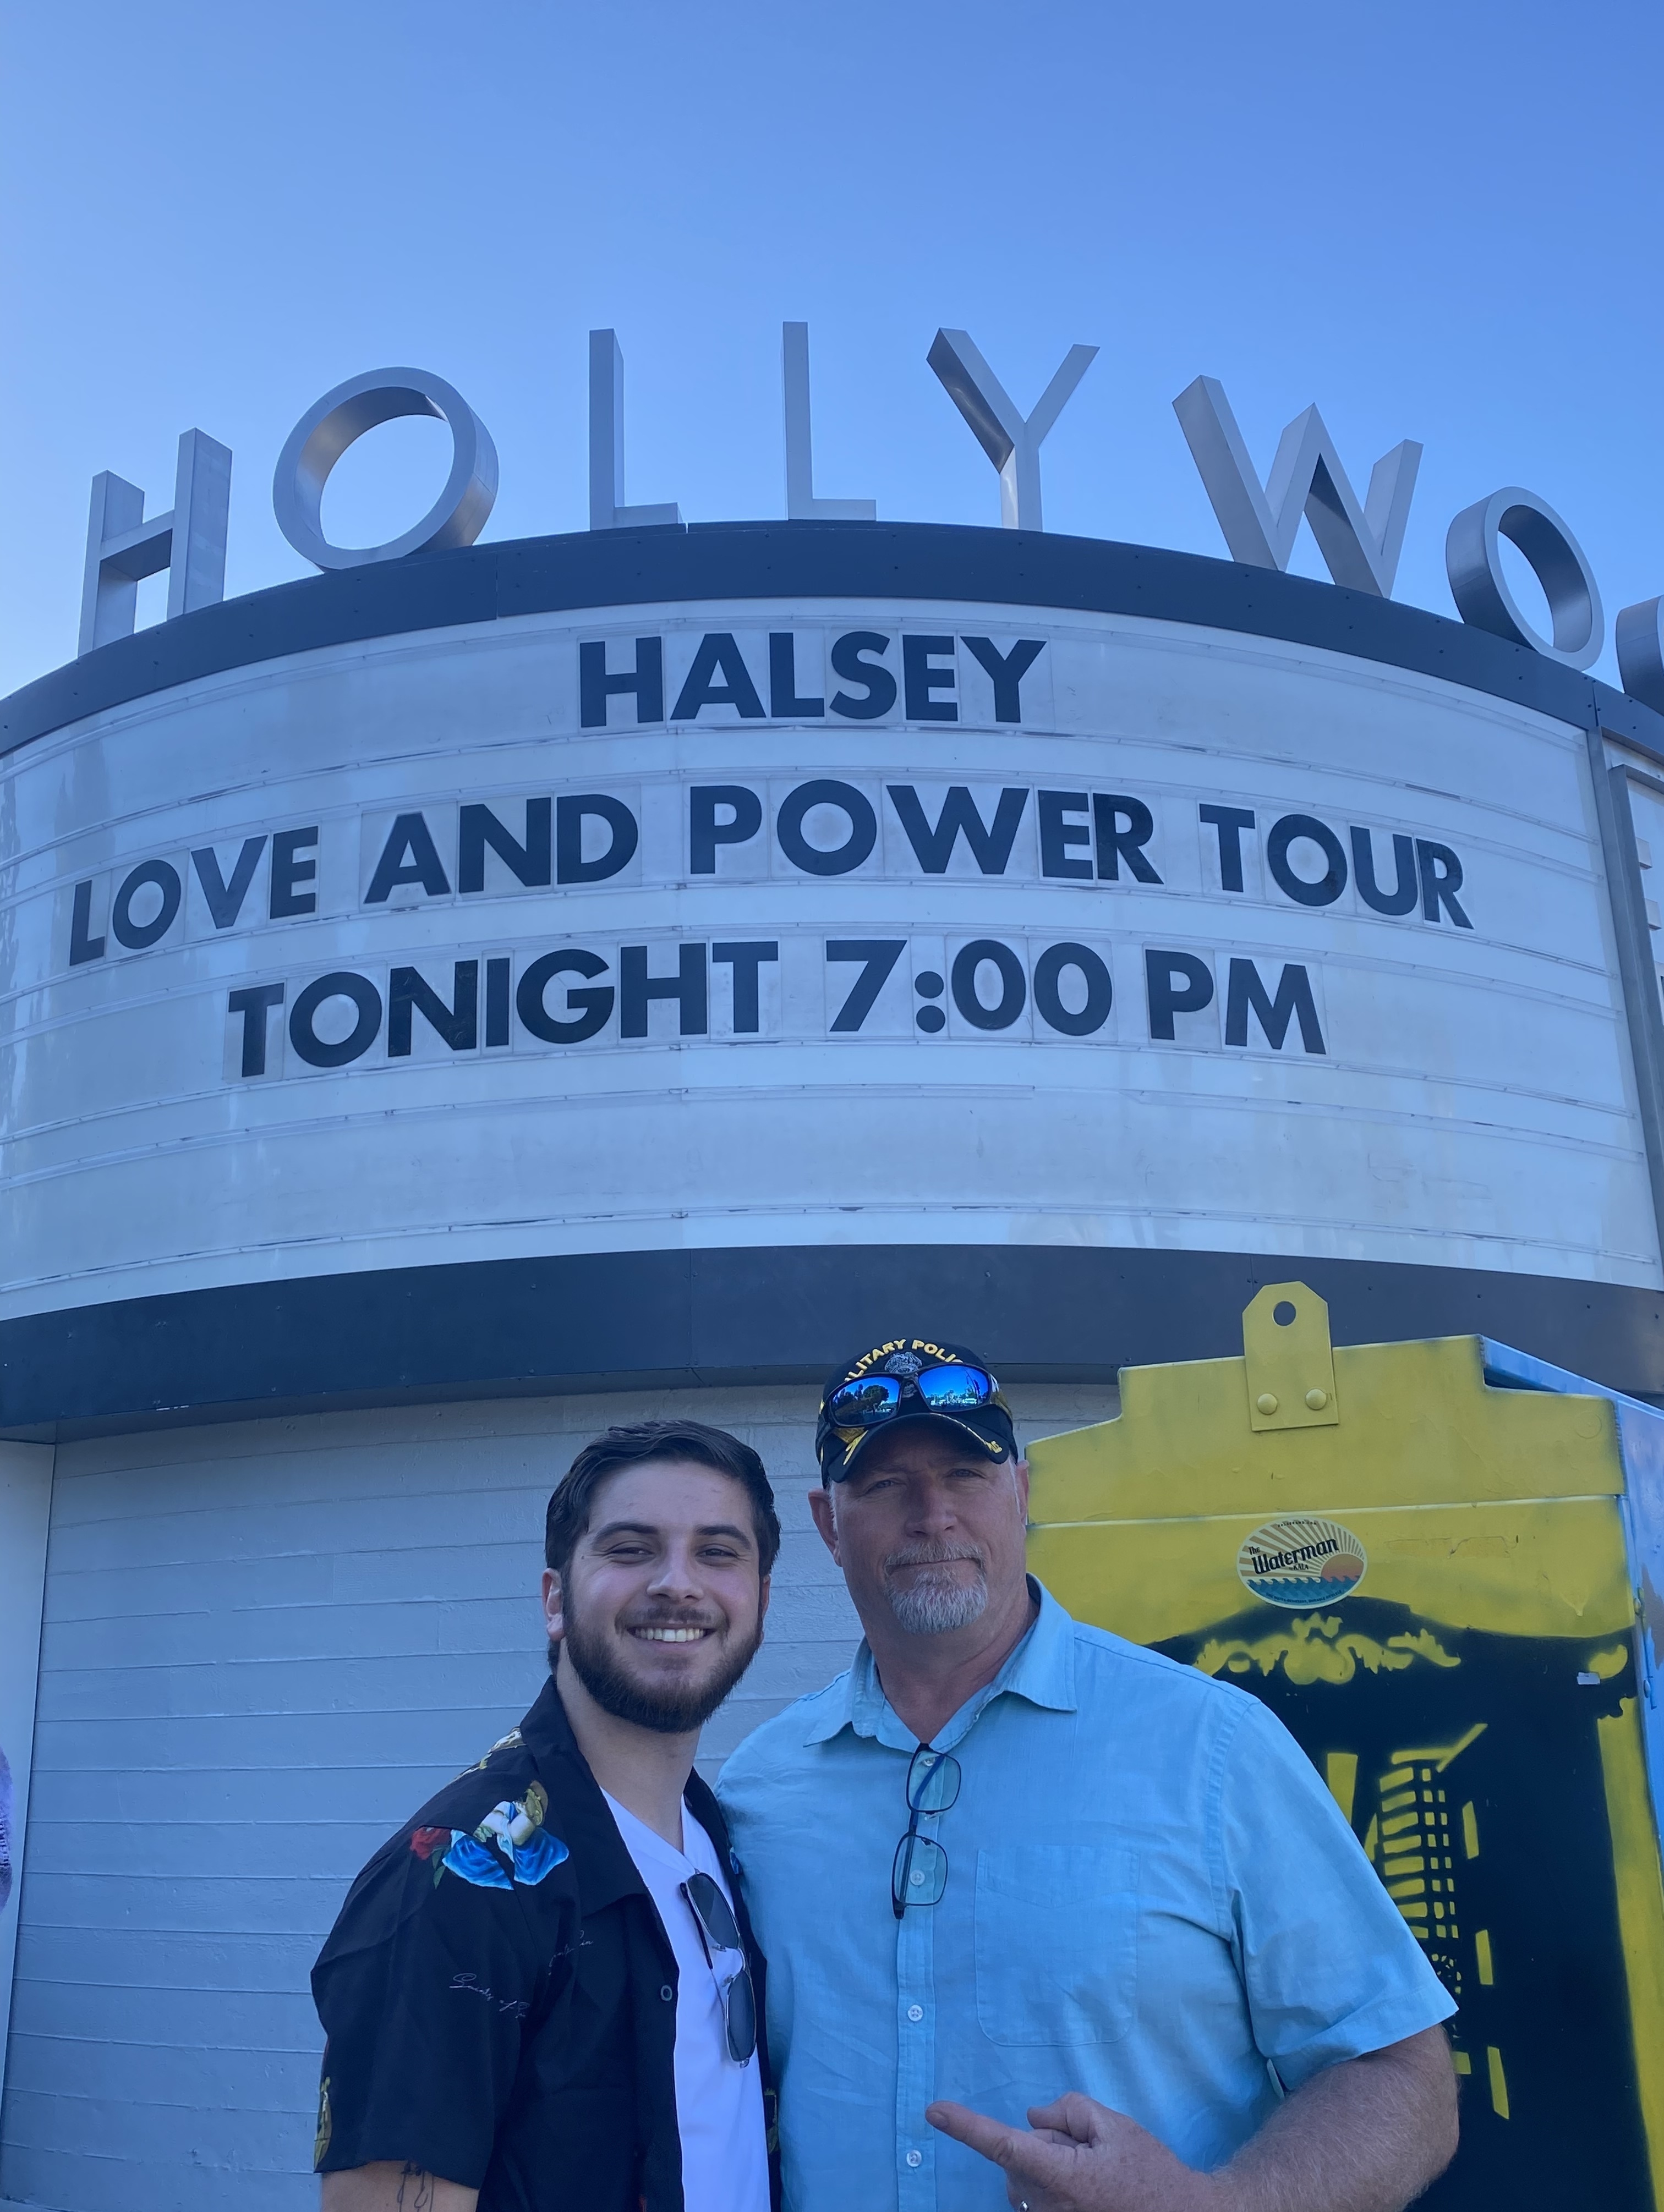 Halsey - Love and Power Tour